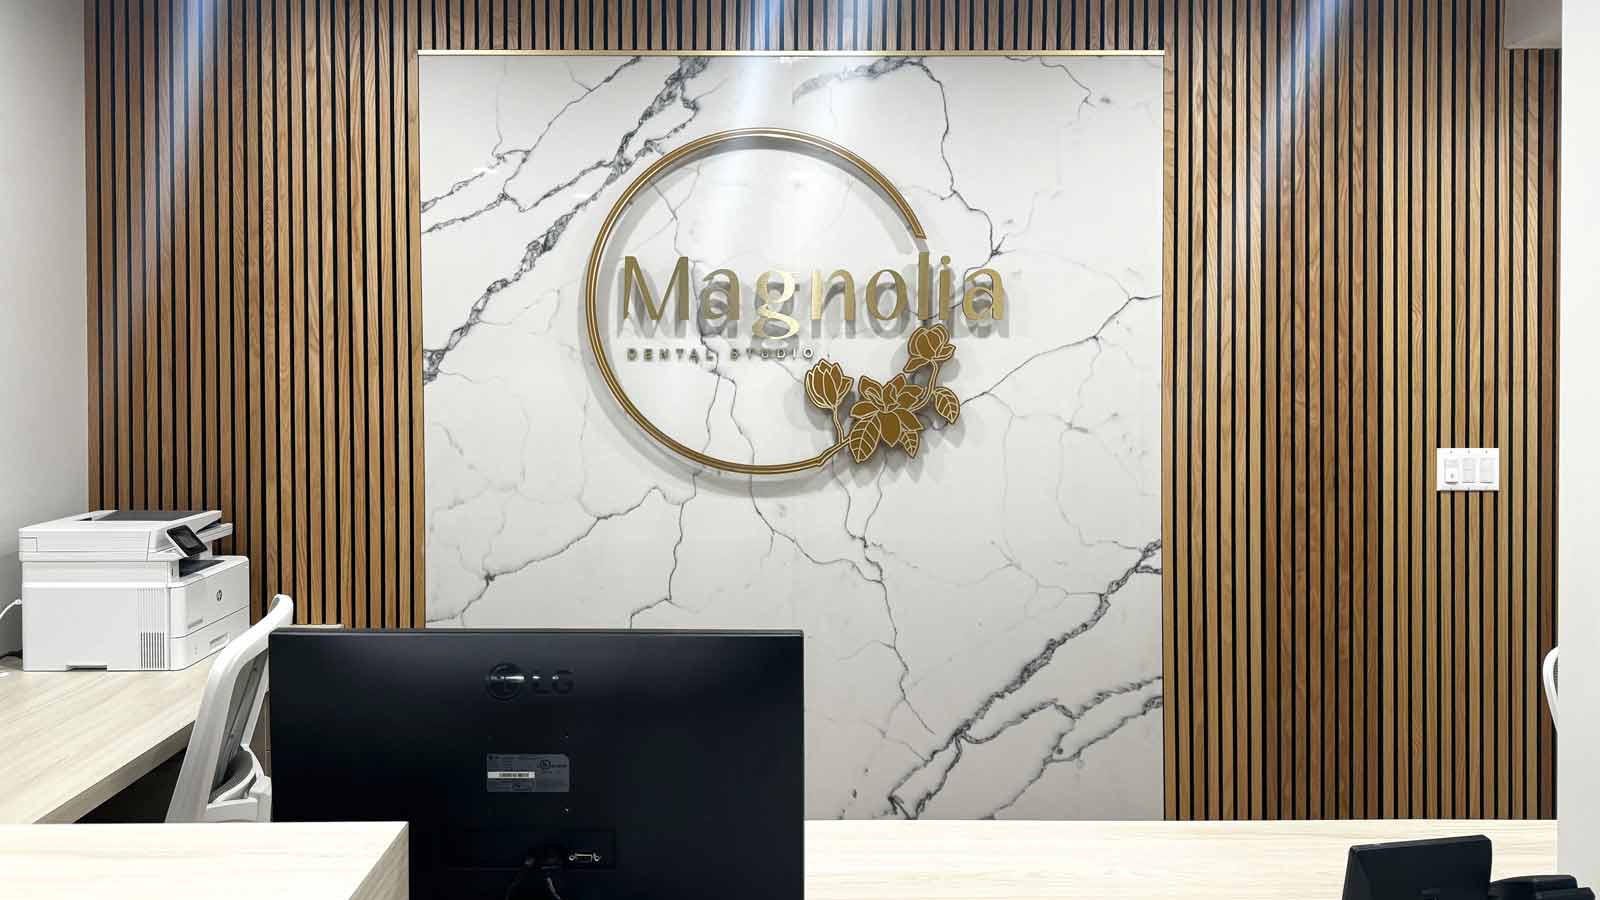 magnolia dental studio lobby sign attached to the wall